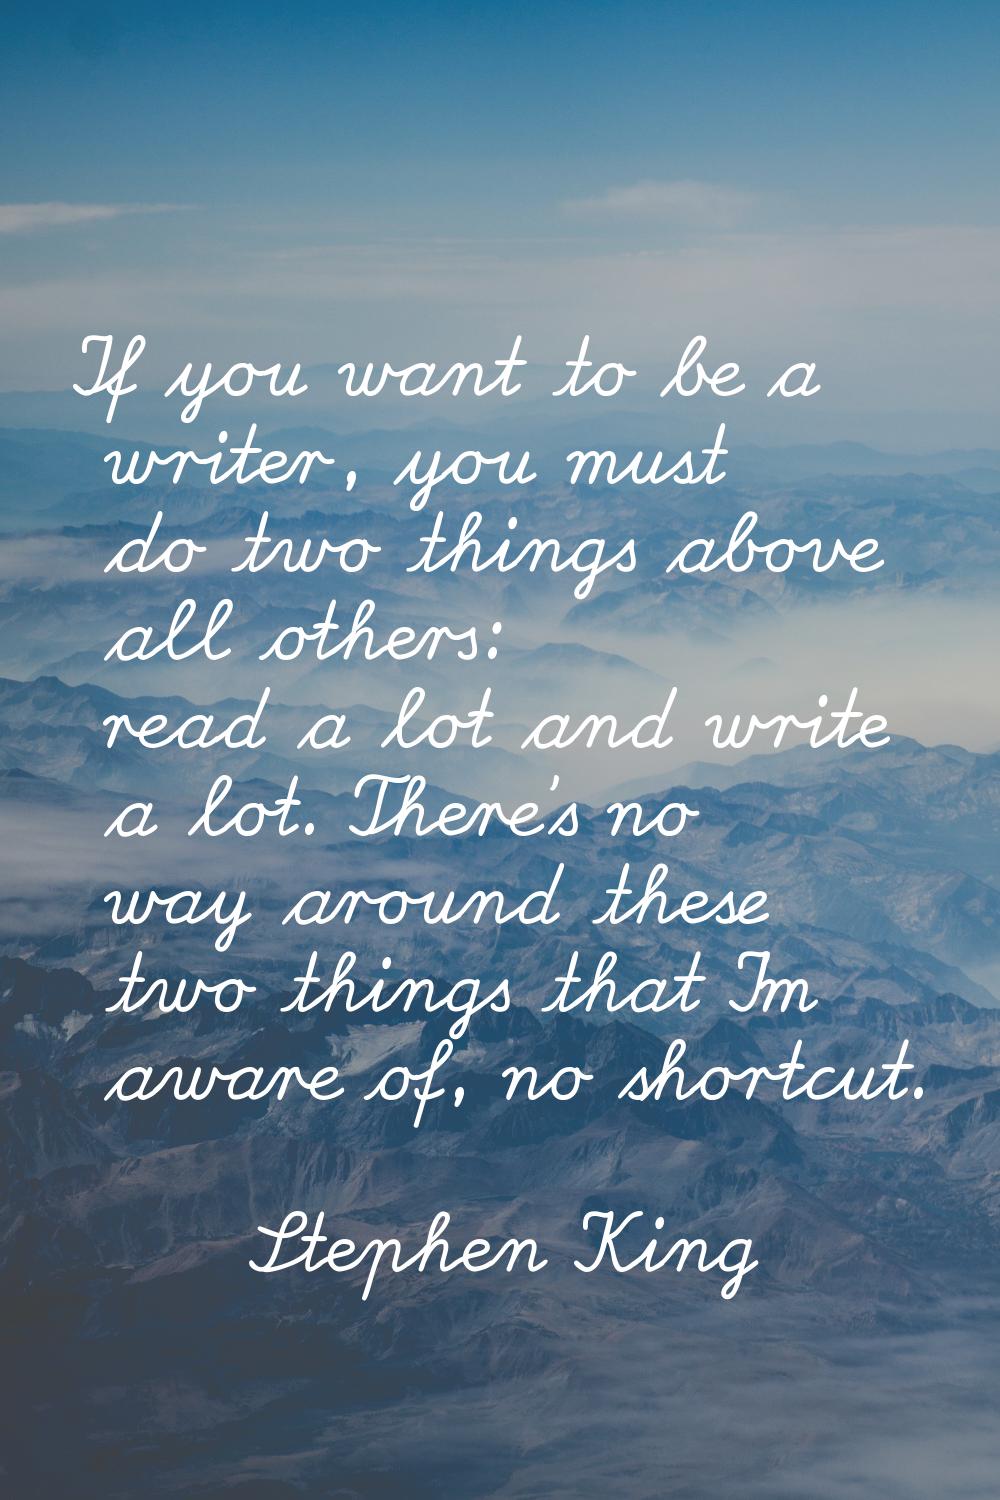 If you want to be a writer, you must do two things above all others: read a lot and write a lot. Th